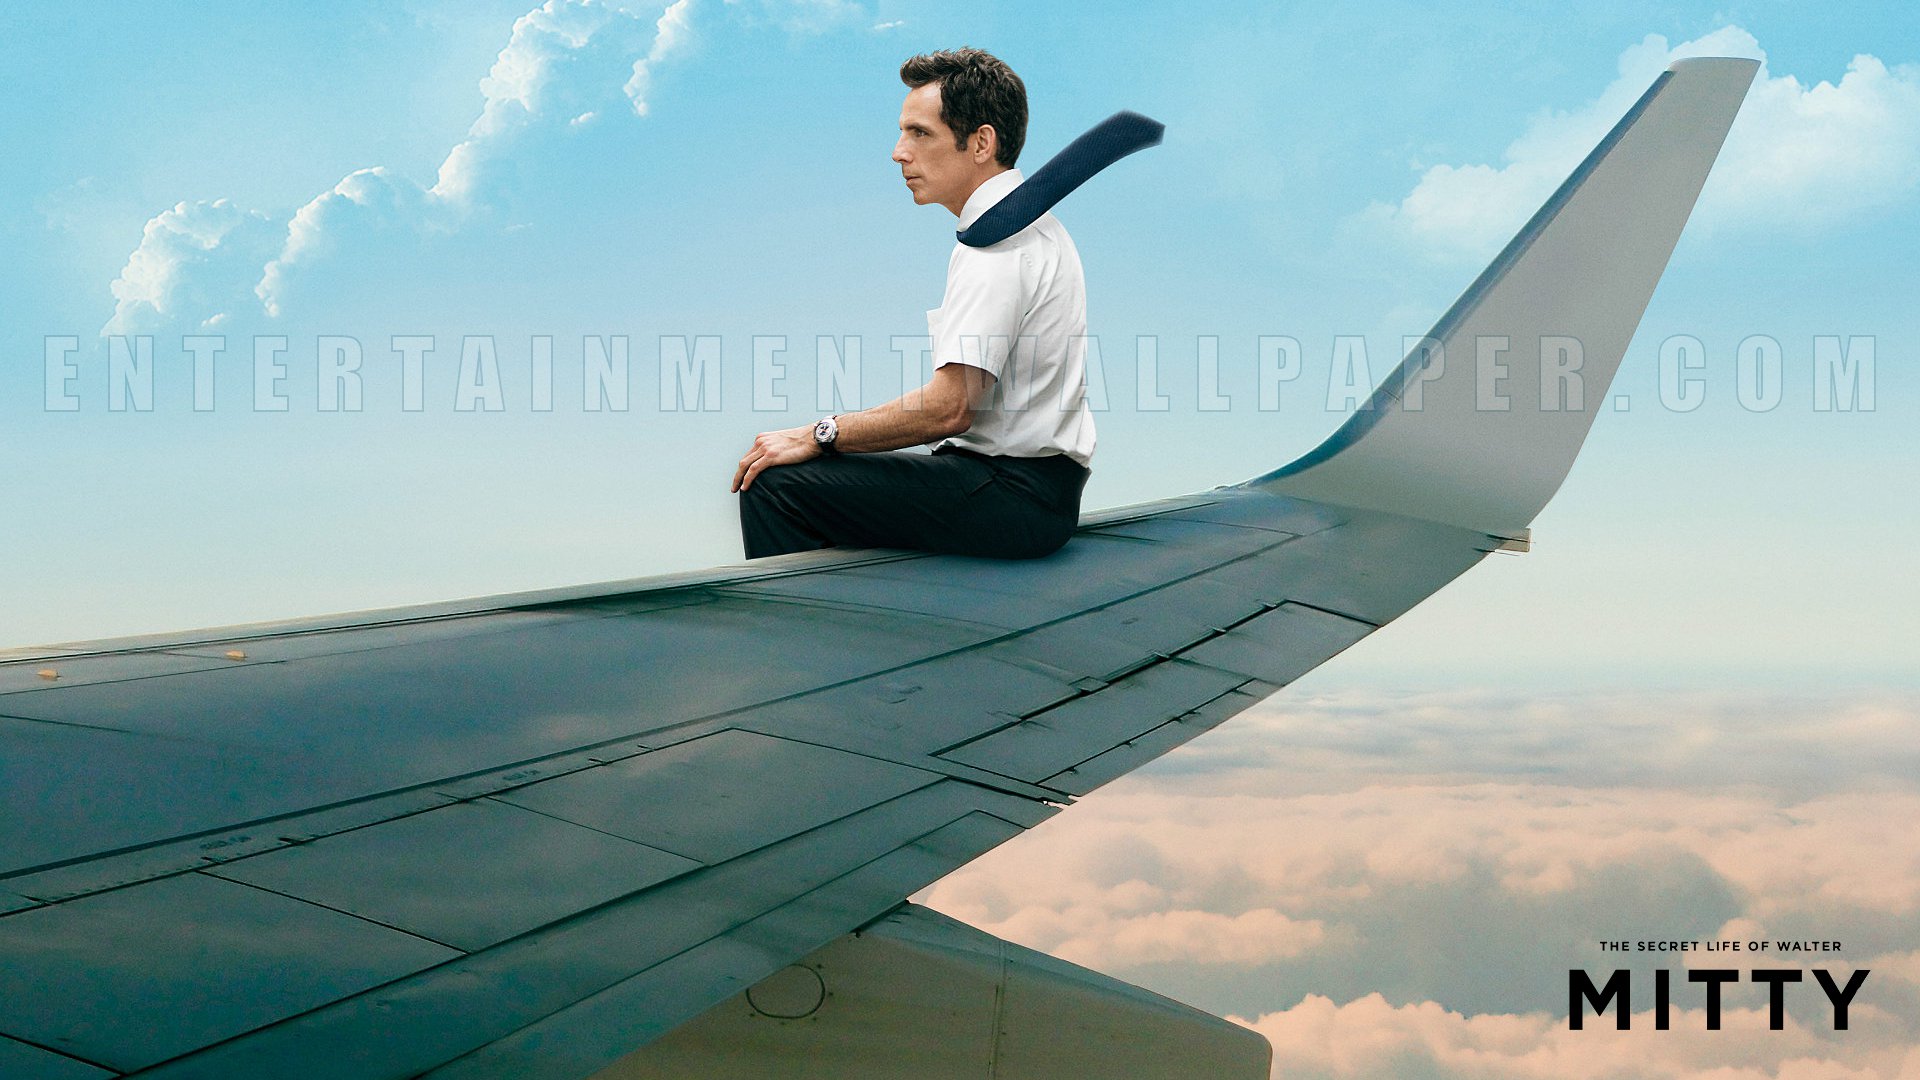 The Secret Life Of Walter Mitty Wallpaper Size - Secret Life Of Walter Mitty Plane , HD Wallpaper & Backgrounds